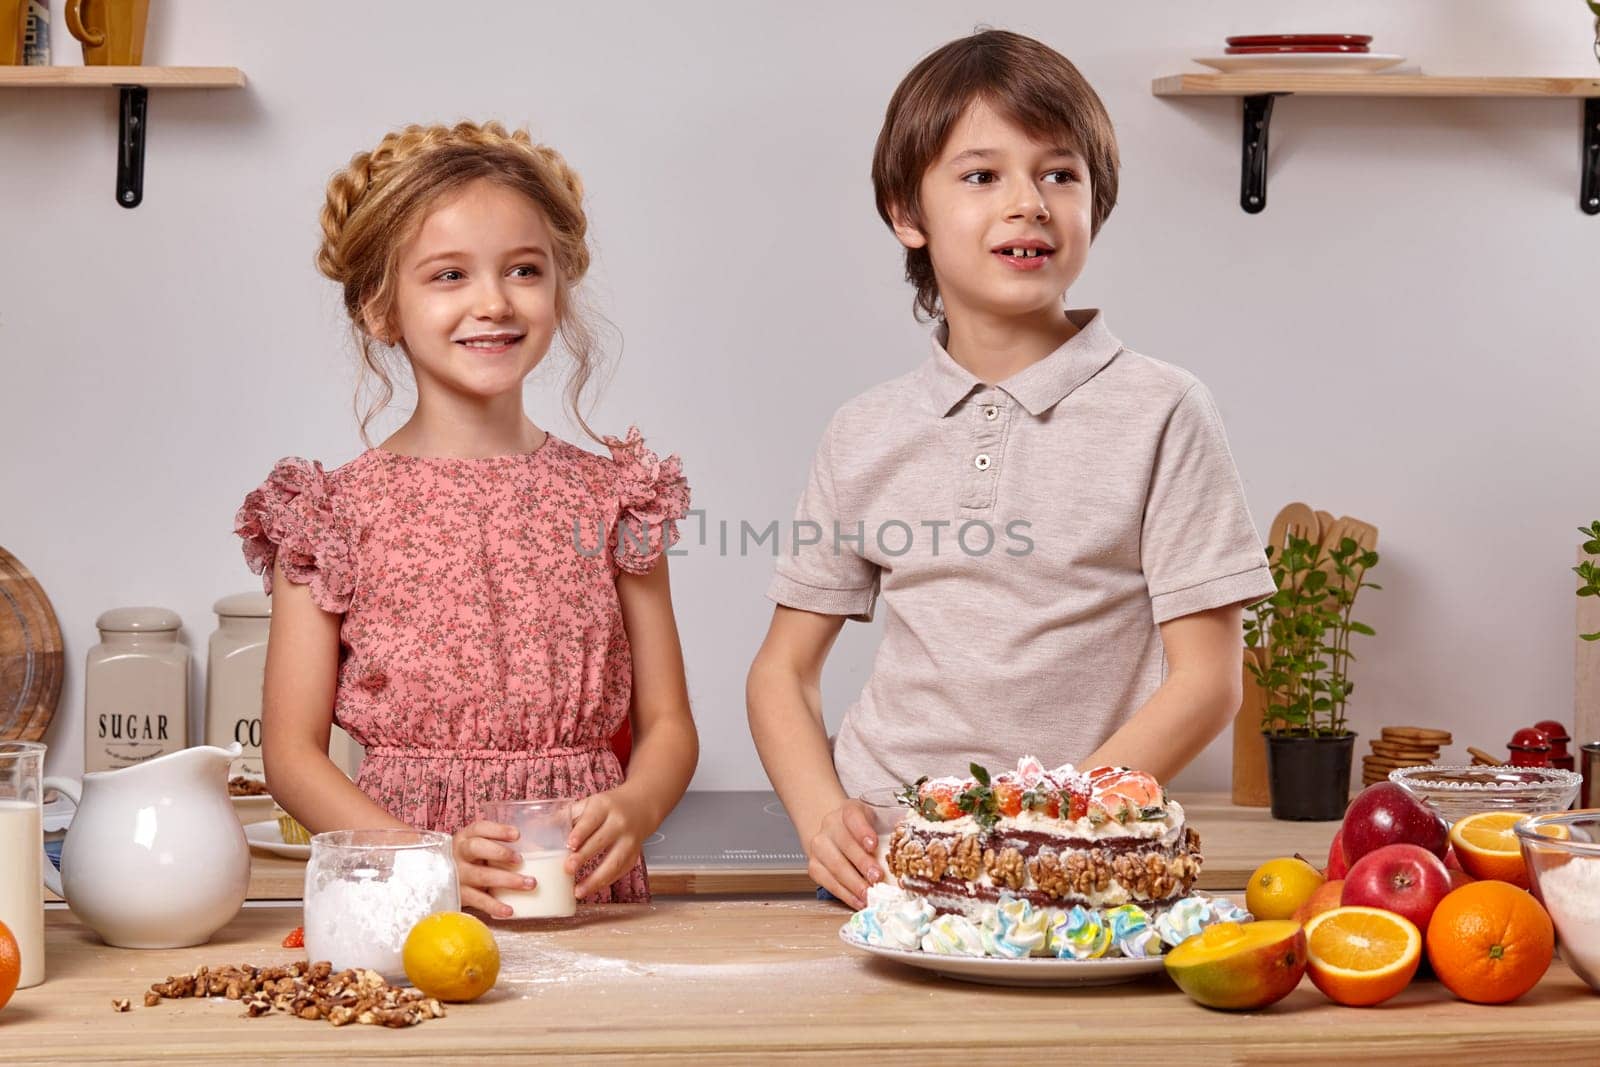 Little handsome boy dressed in a light t-shirt and jeans and a charming girl wearing in a pink dress are making a cake at a kitchen, against a white wall with shelves on it. They are smiling and looking away.